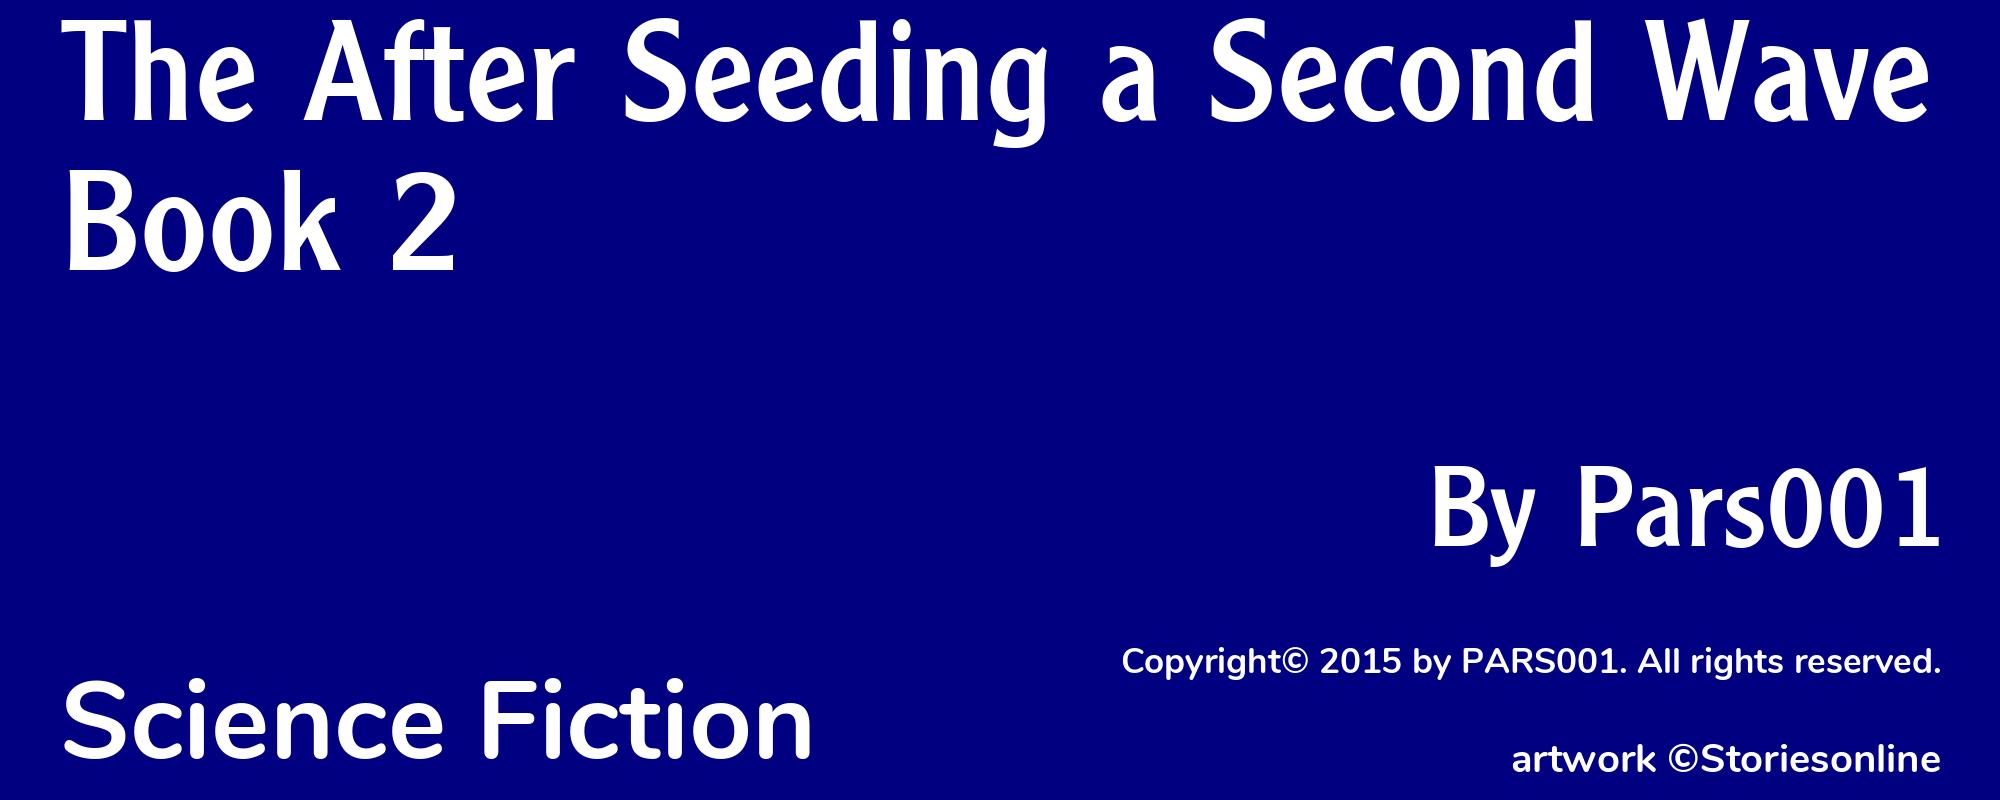 The After Seeding a Second Wave Book 2 - Cover